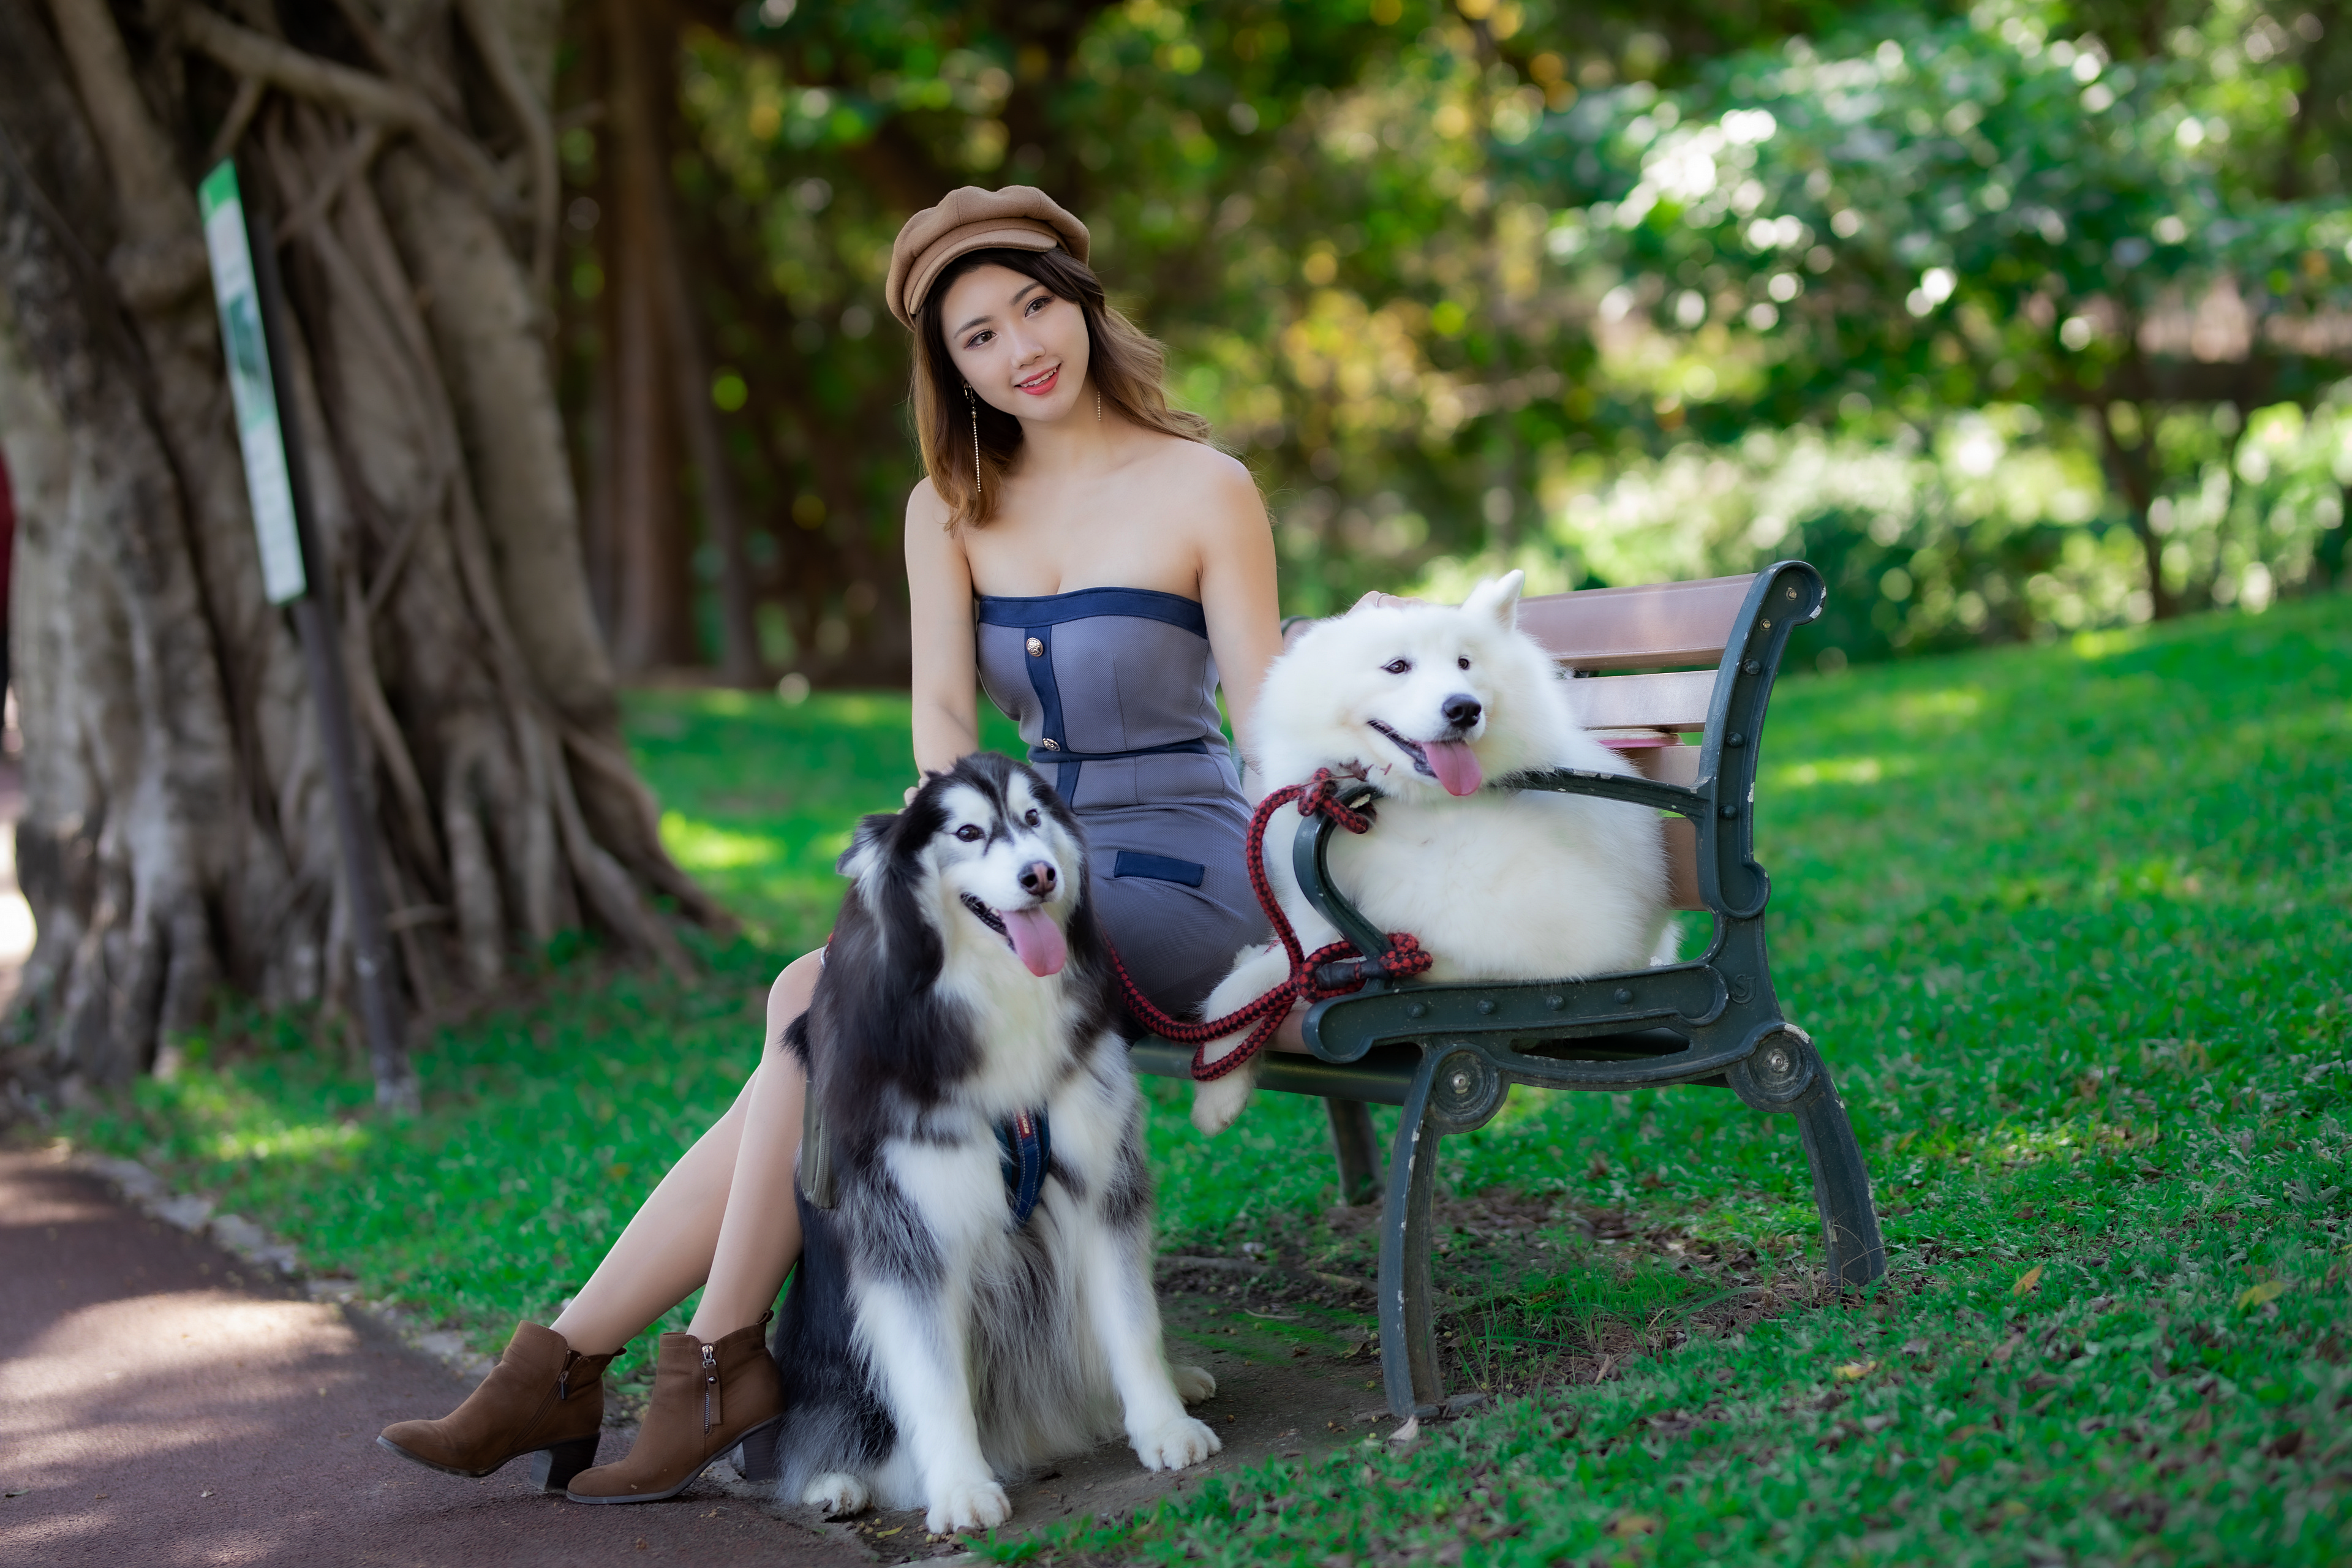 People 3840x2560 Asian model women long hair brunette sitting bench dog trees grass shoes berets bare shoulders dress depth of field animals mammals makeup tongue out hat women with hats park women outdoors heels boots chingcho